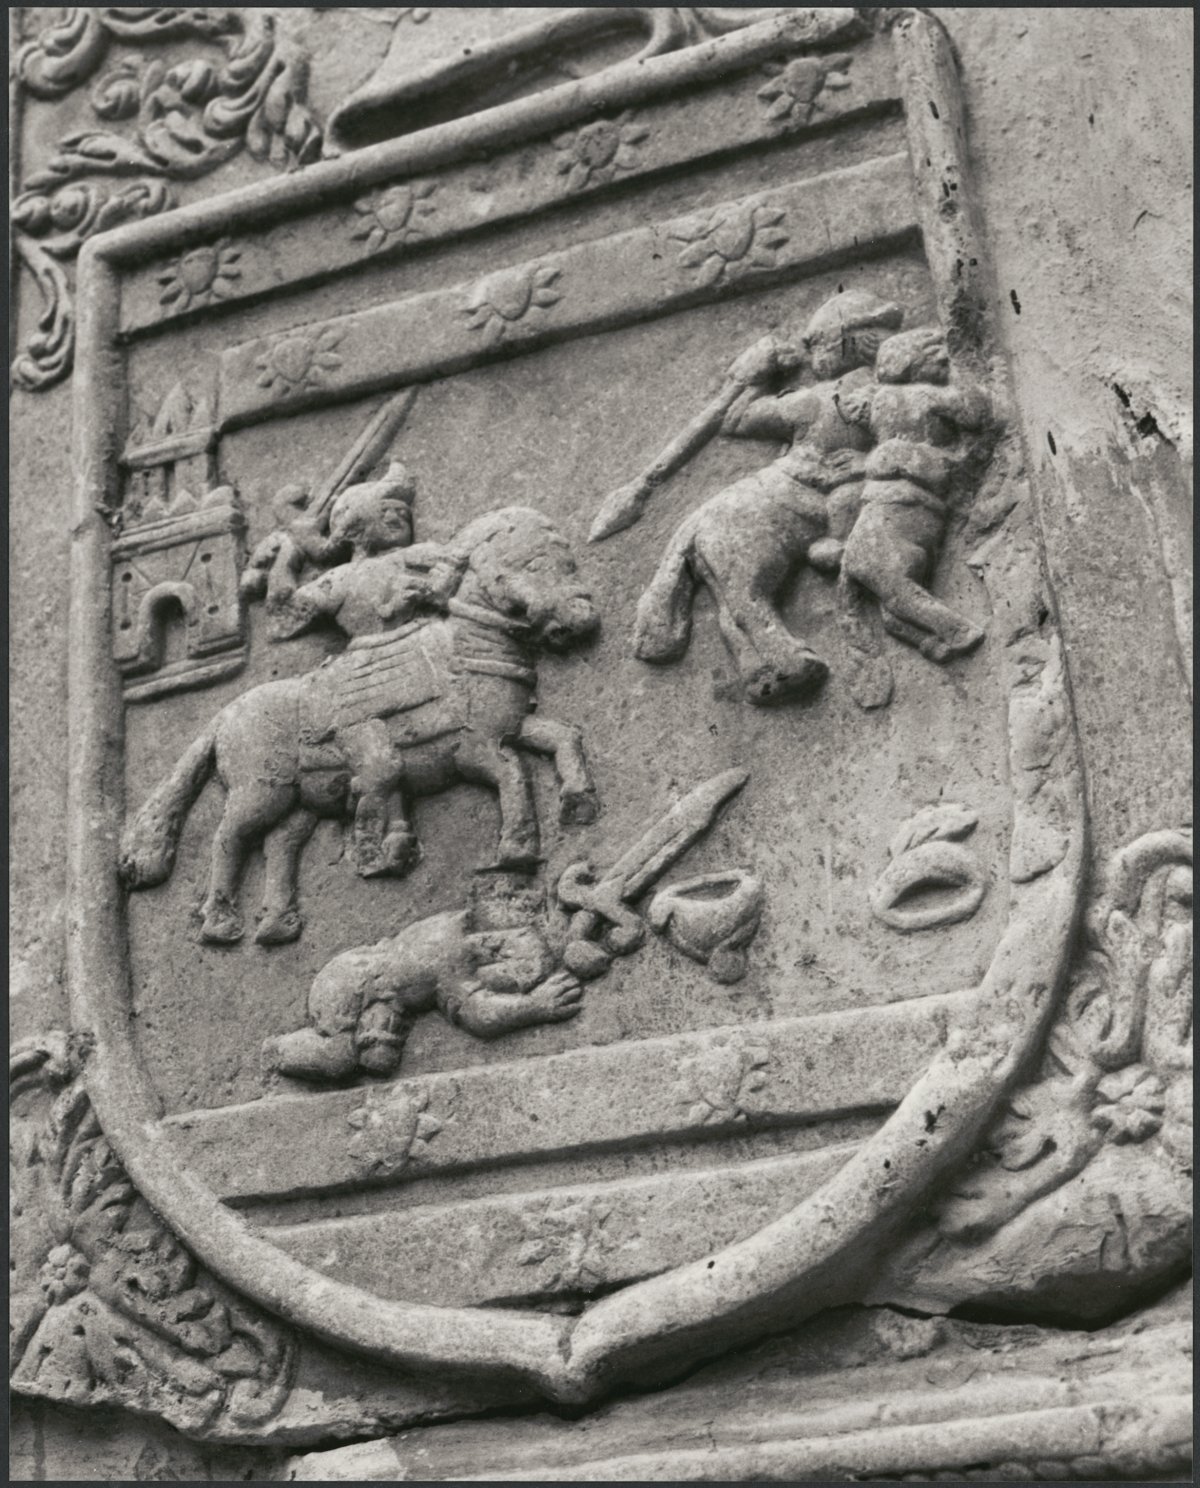 A close up of an architectural detail on a building. The detail is a knight on horseback fighting. The image is enclosed in a shield.